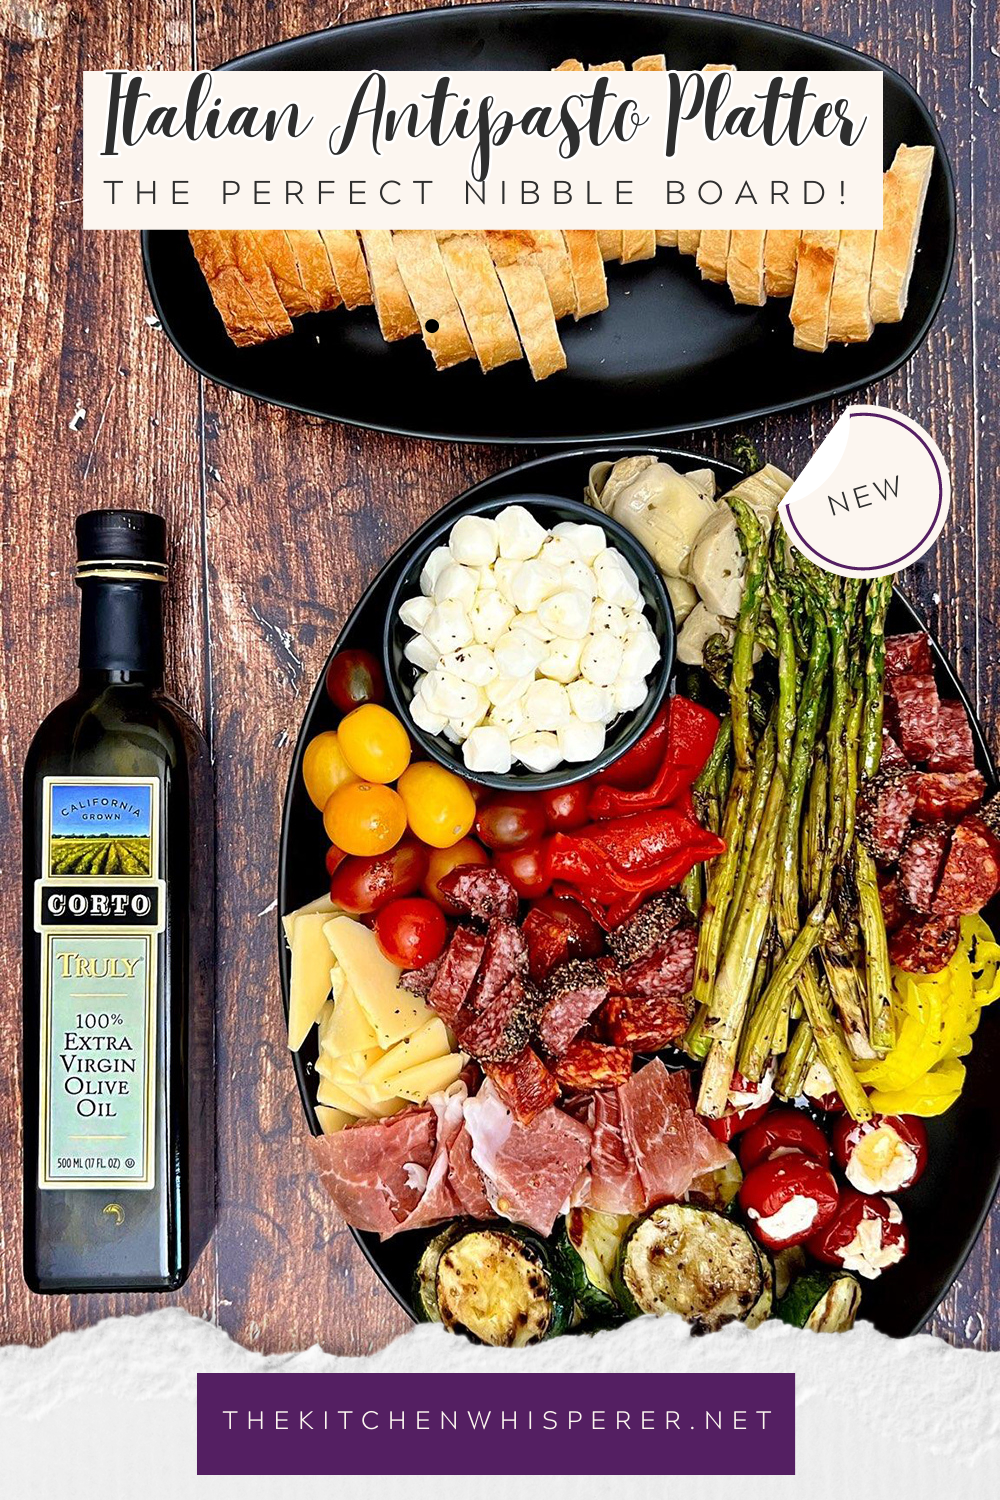 Meat Lovers Charcuterie Board (Great for Entertaining) - Out Grilling